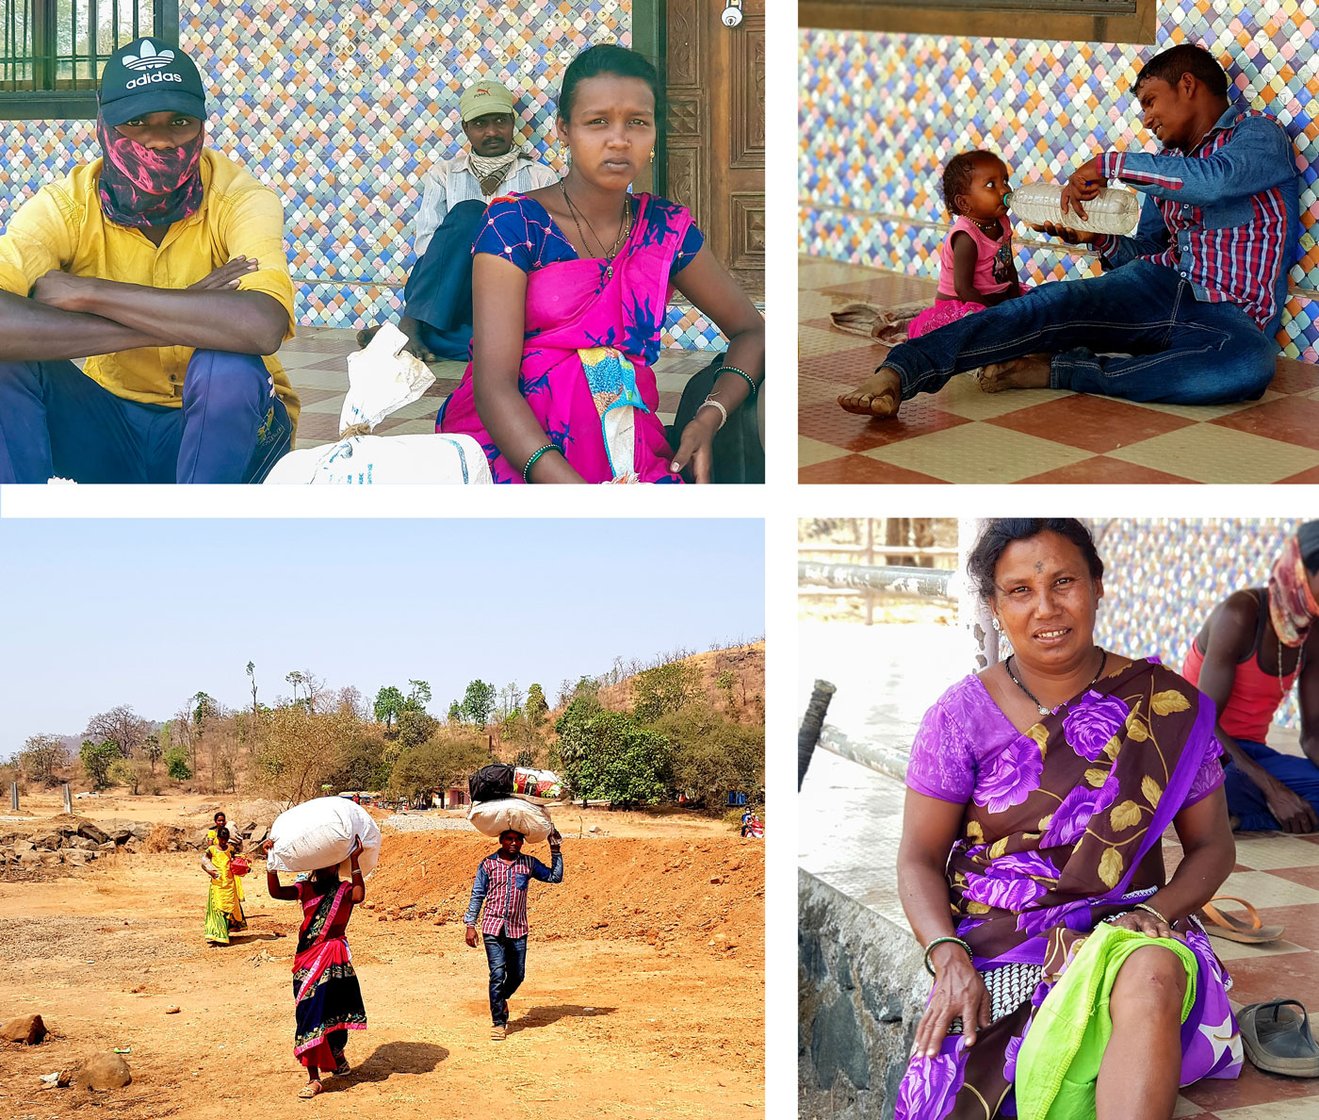 Sapna and her husband Kiran Wagh (top left), Devendra Diva and his little daughter (top right), and Kavita Diva (bottom right) were among the group of Katkari Adivasis trying to reach their village in Palghar district from the brick kilns where they work

